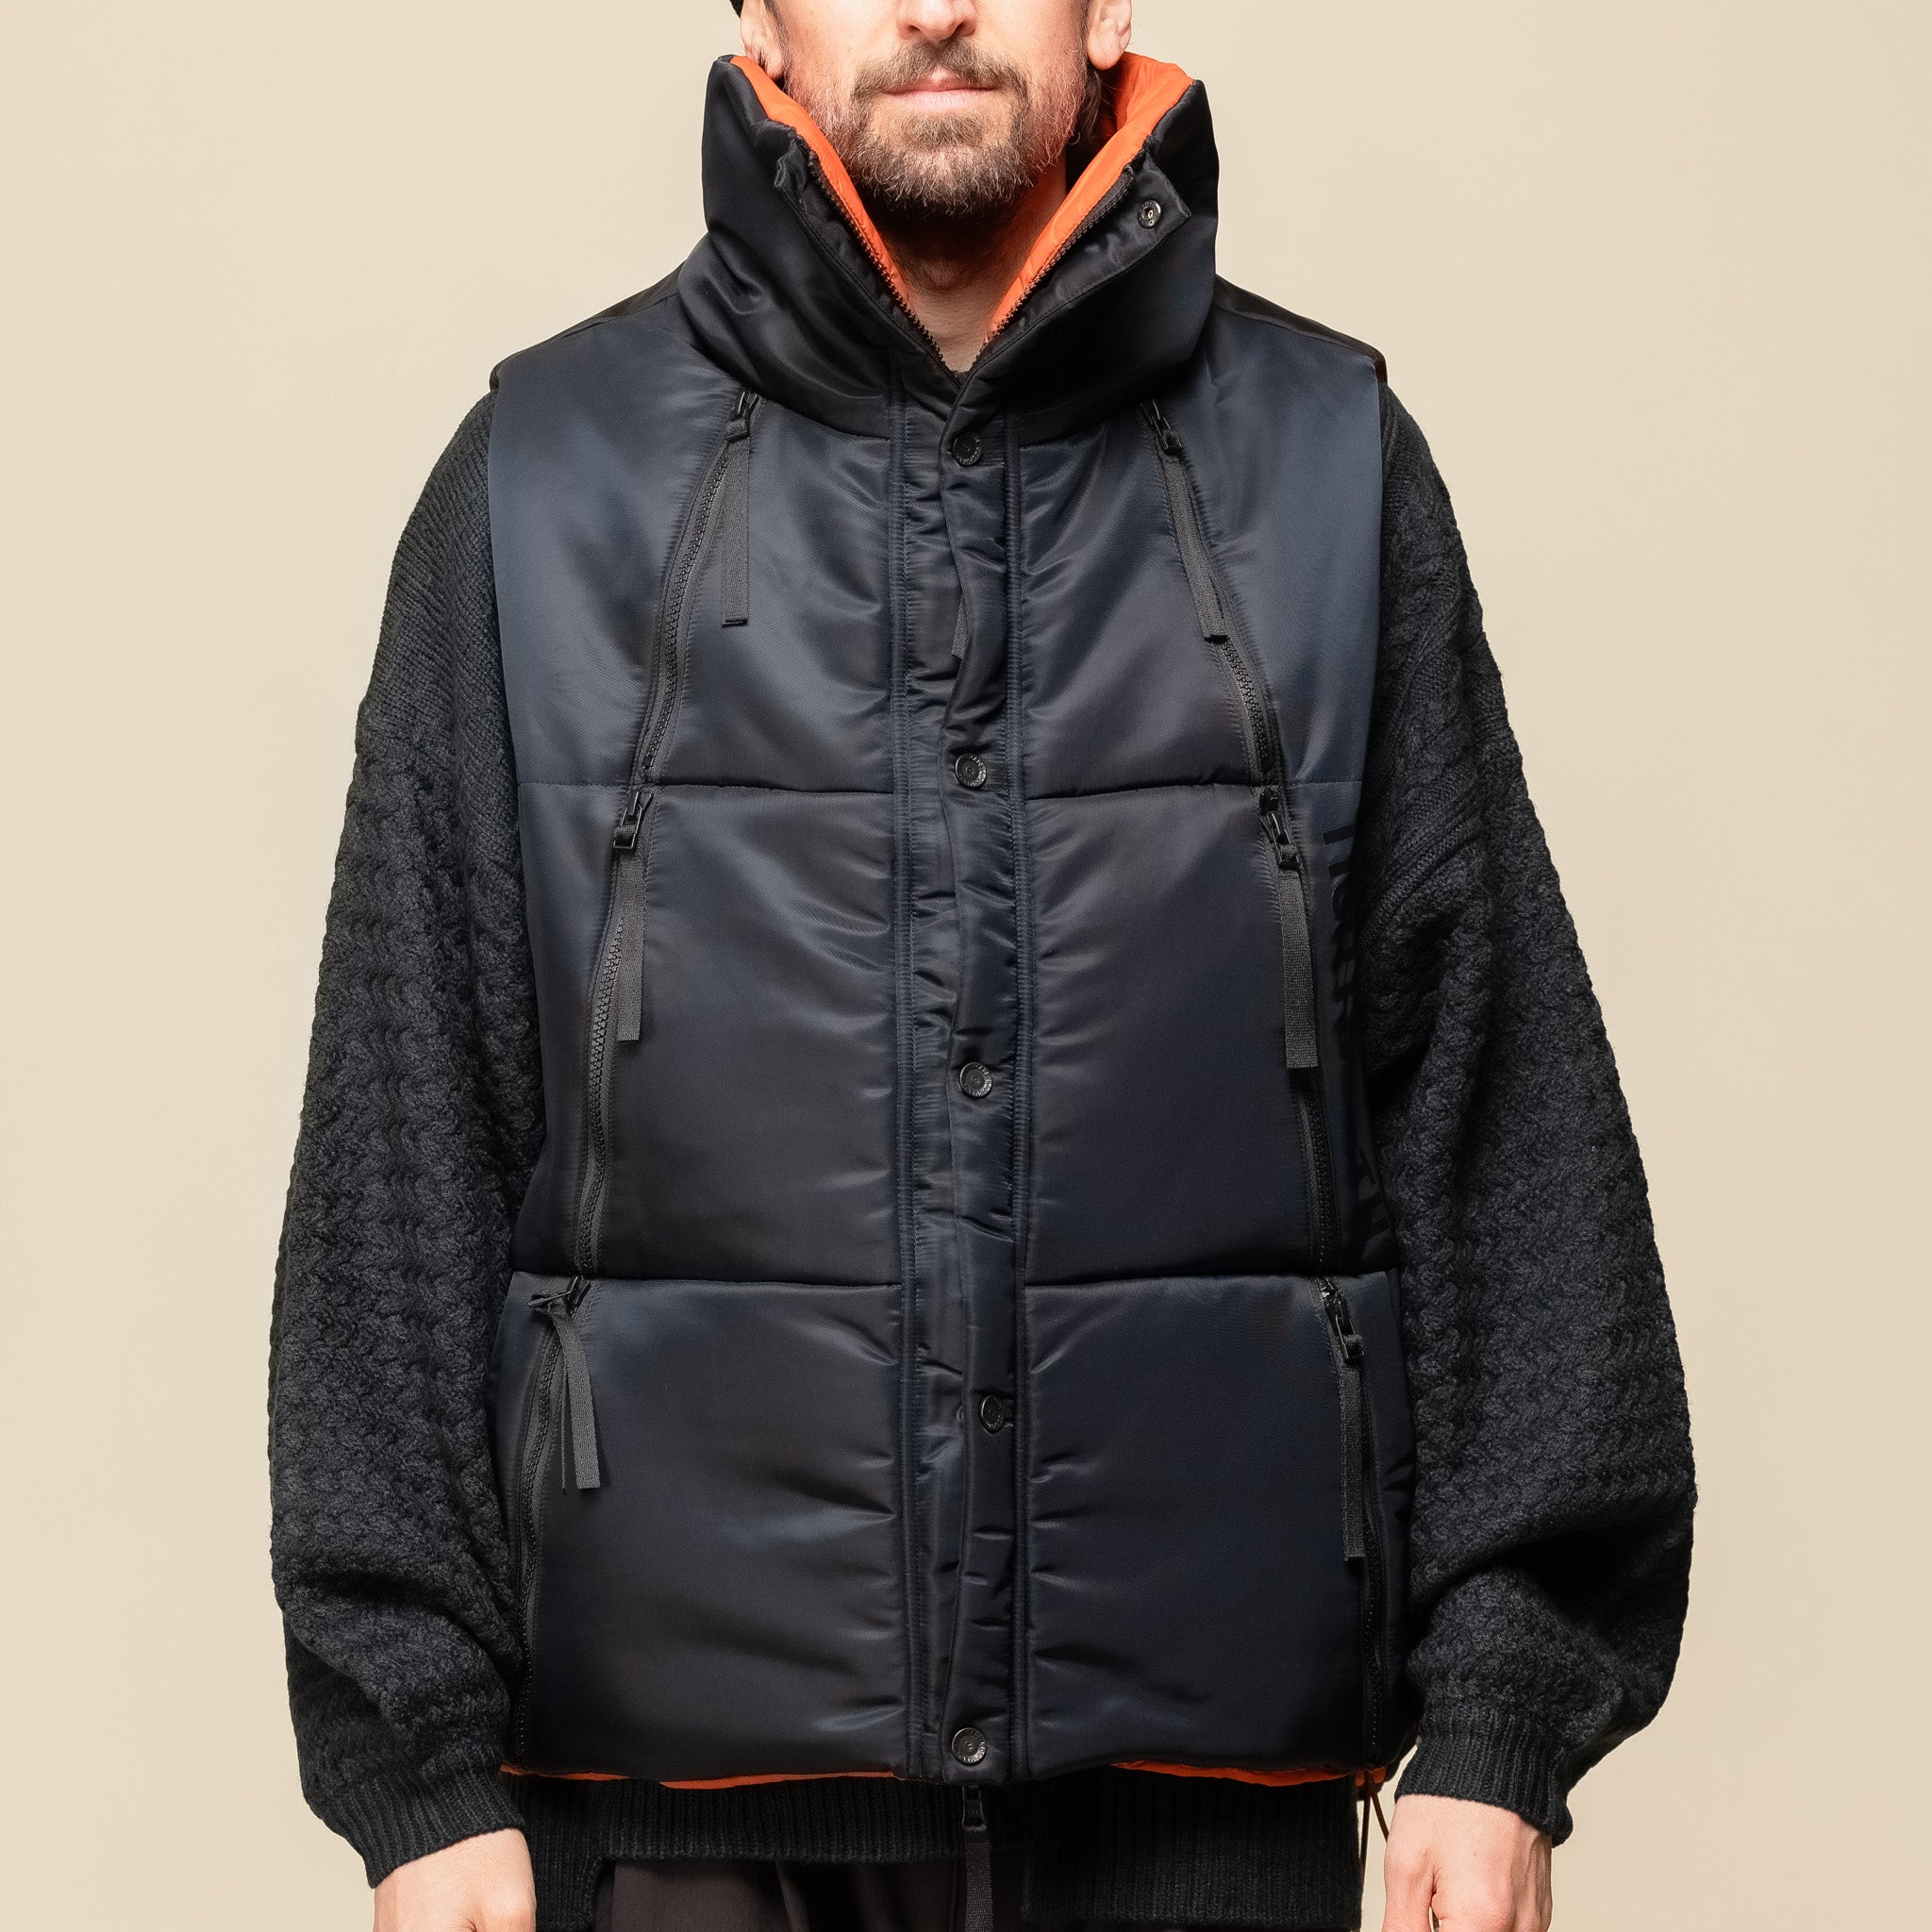 GOOPiMADE® x TIGHTBOOTH “GMT-01V” - 2-Way Padded Down Vest